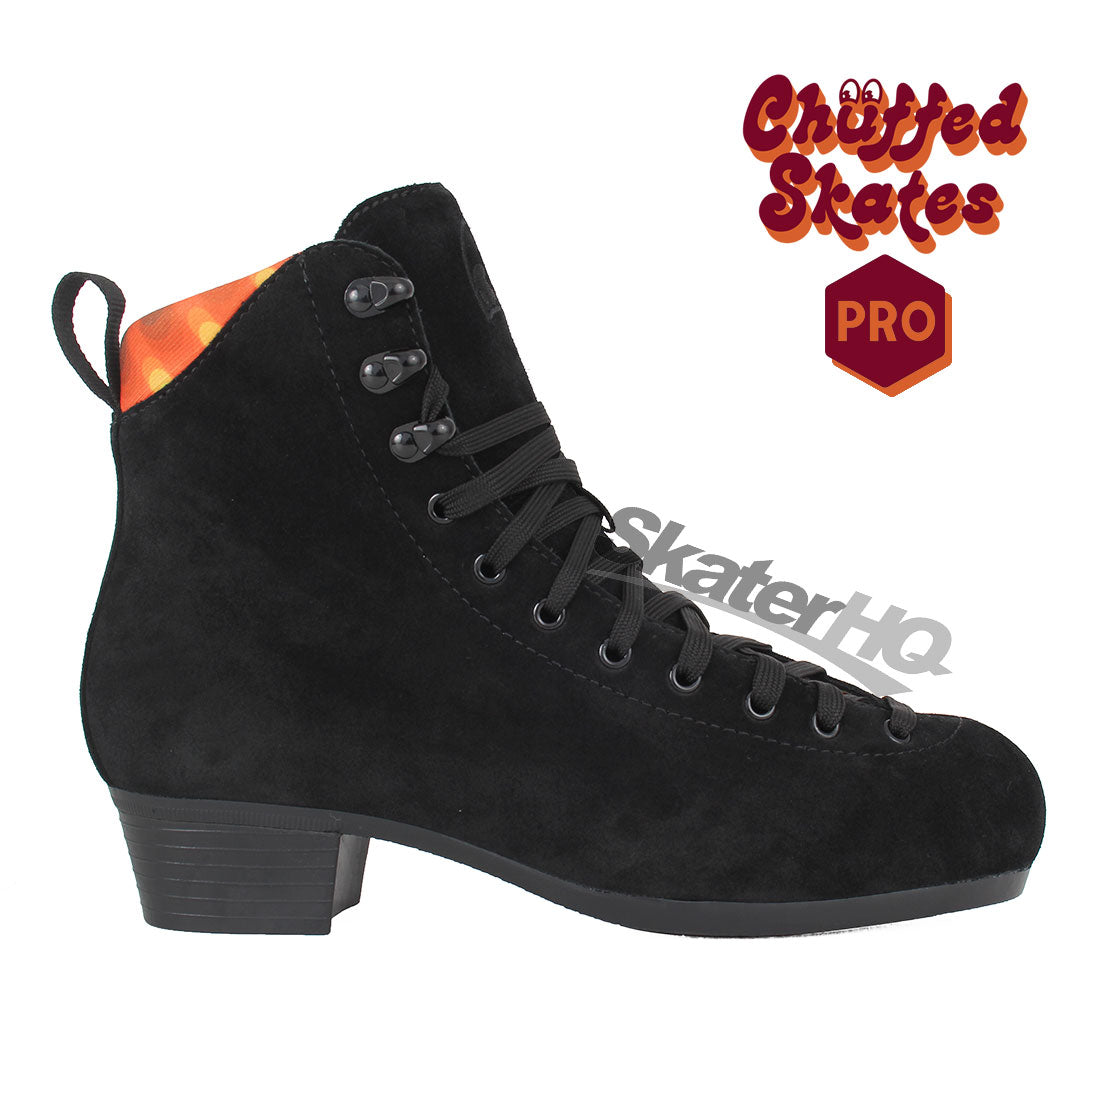 Chuffed Pro Boot Black 8US Roller Skate Boots